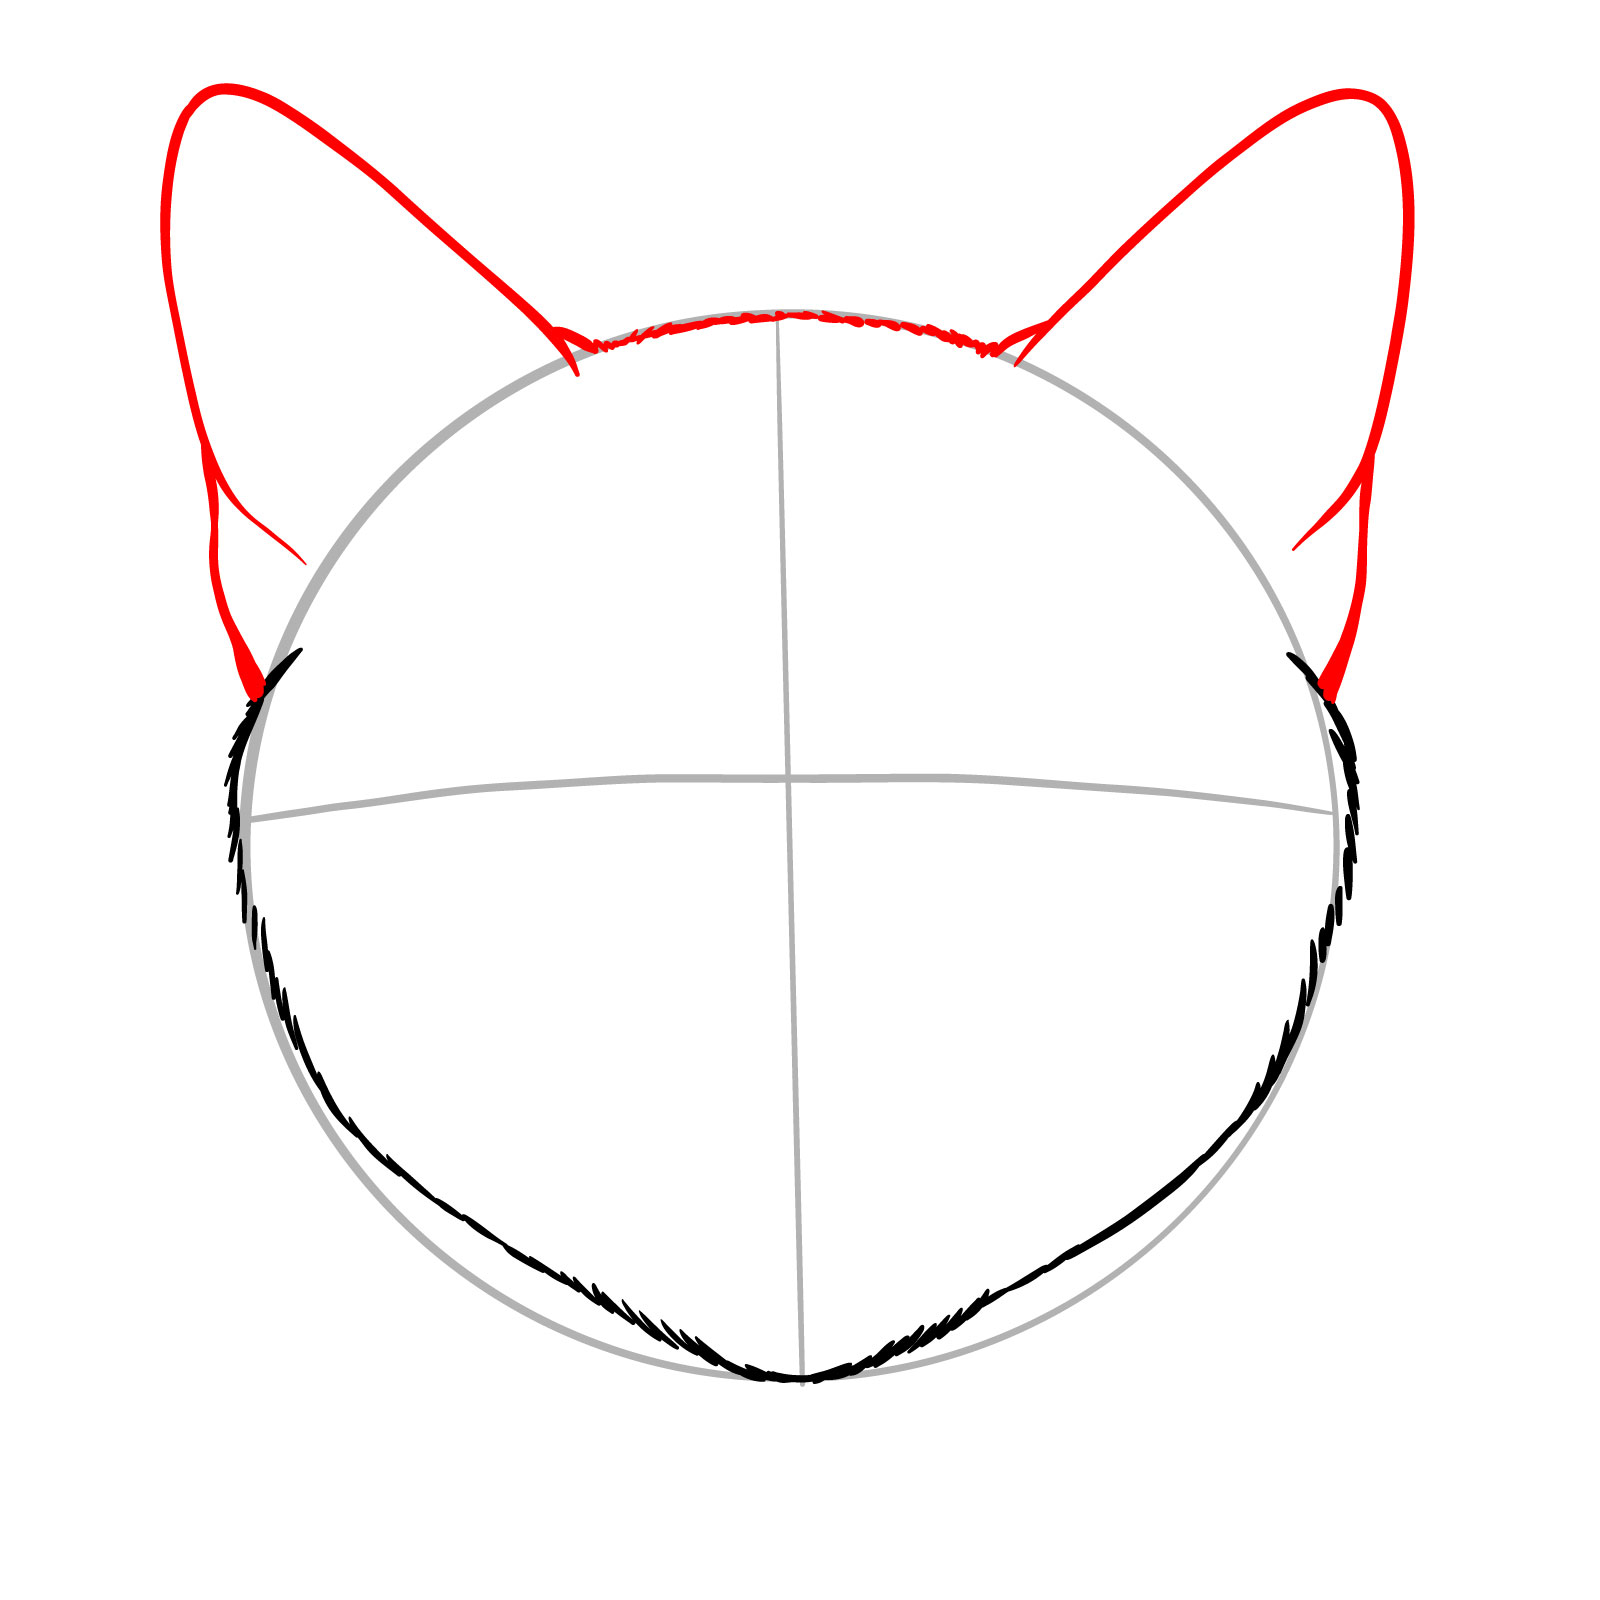 Addition of ears and the top of the head to the cat's face sketch - step 03